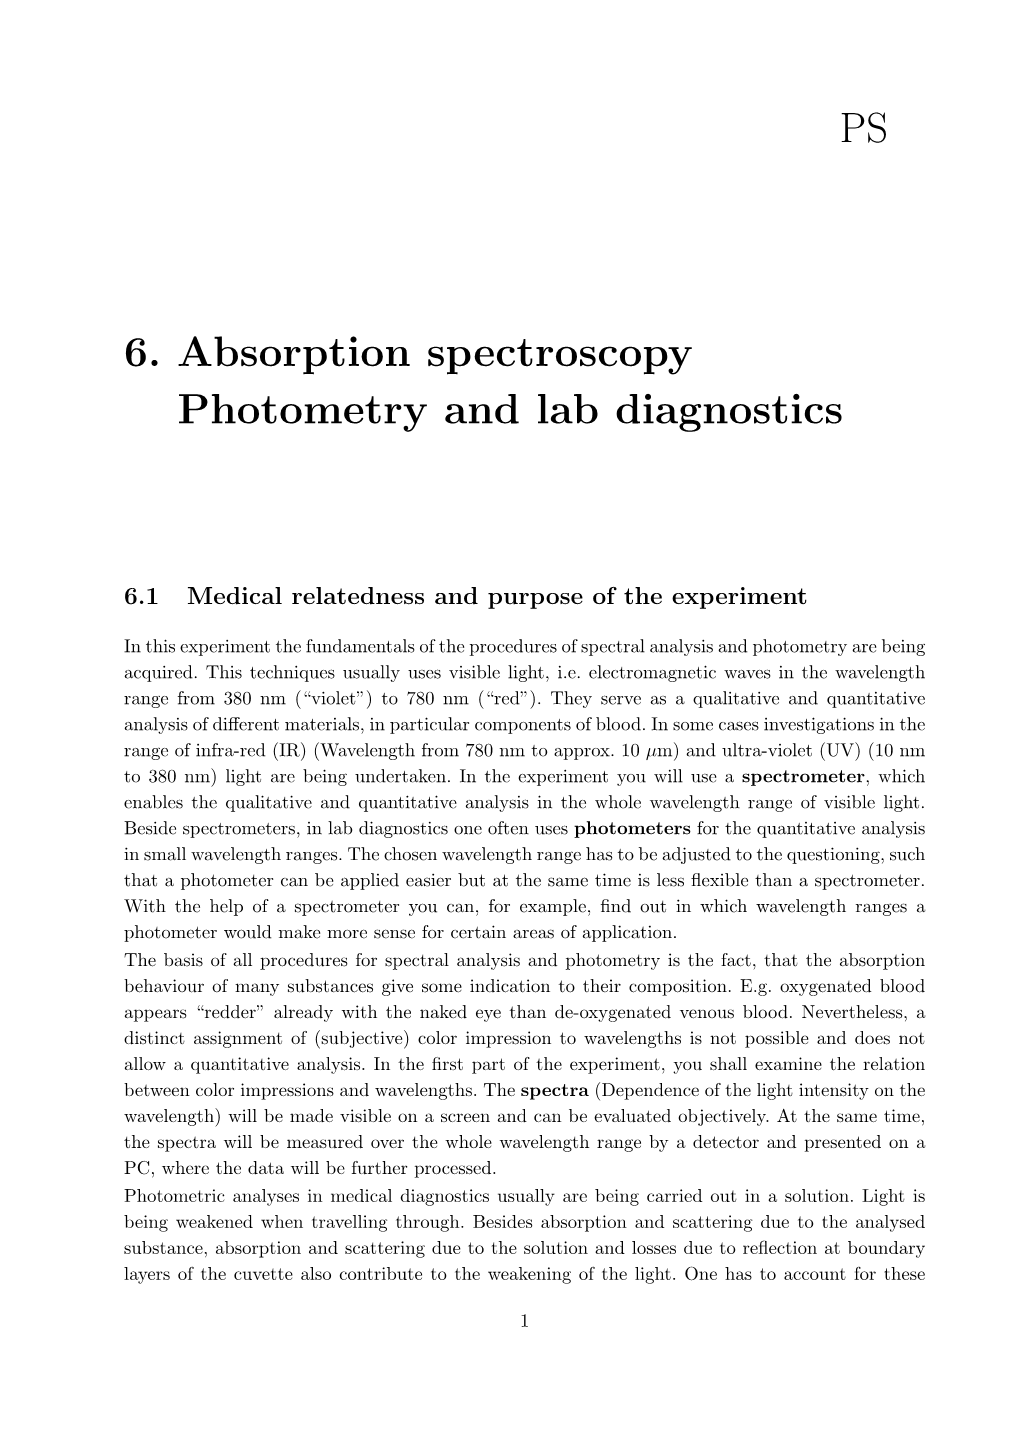 6. Absorption Spectroscopy Photometry and Lab Diagnostics PS